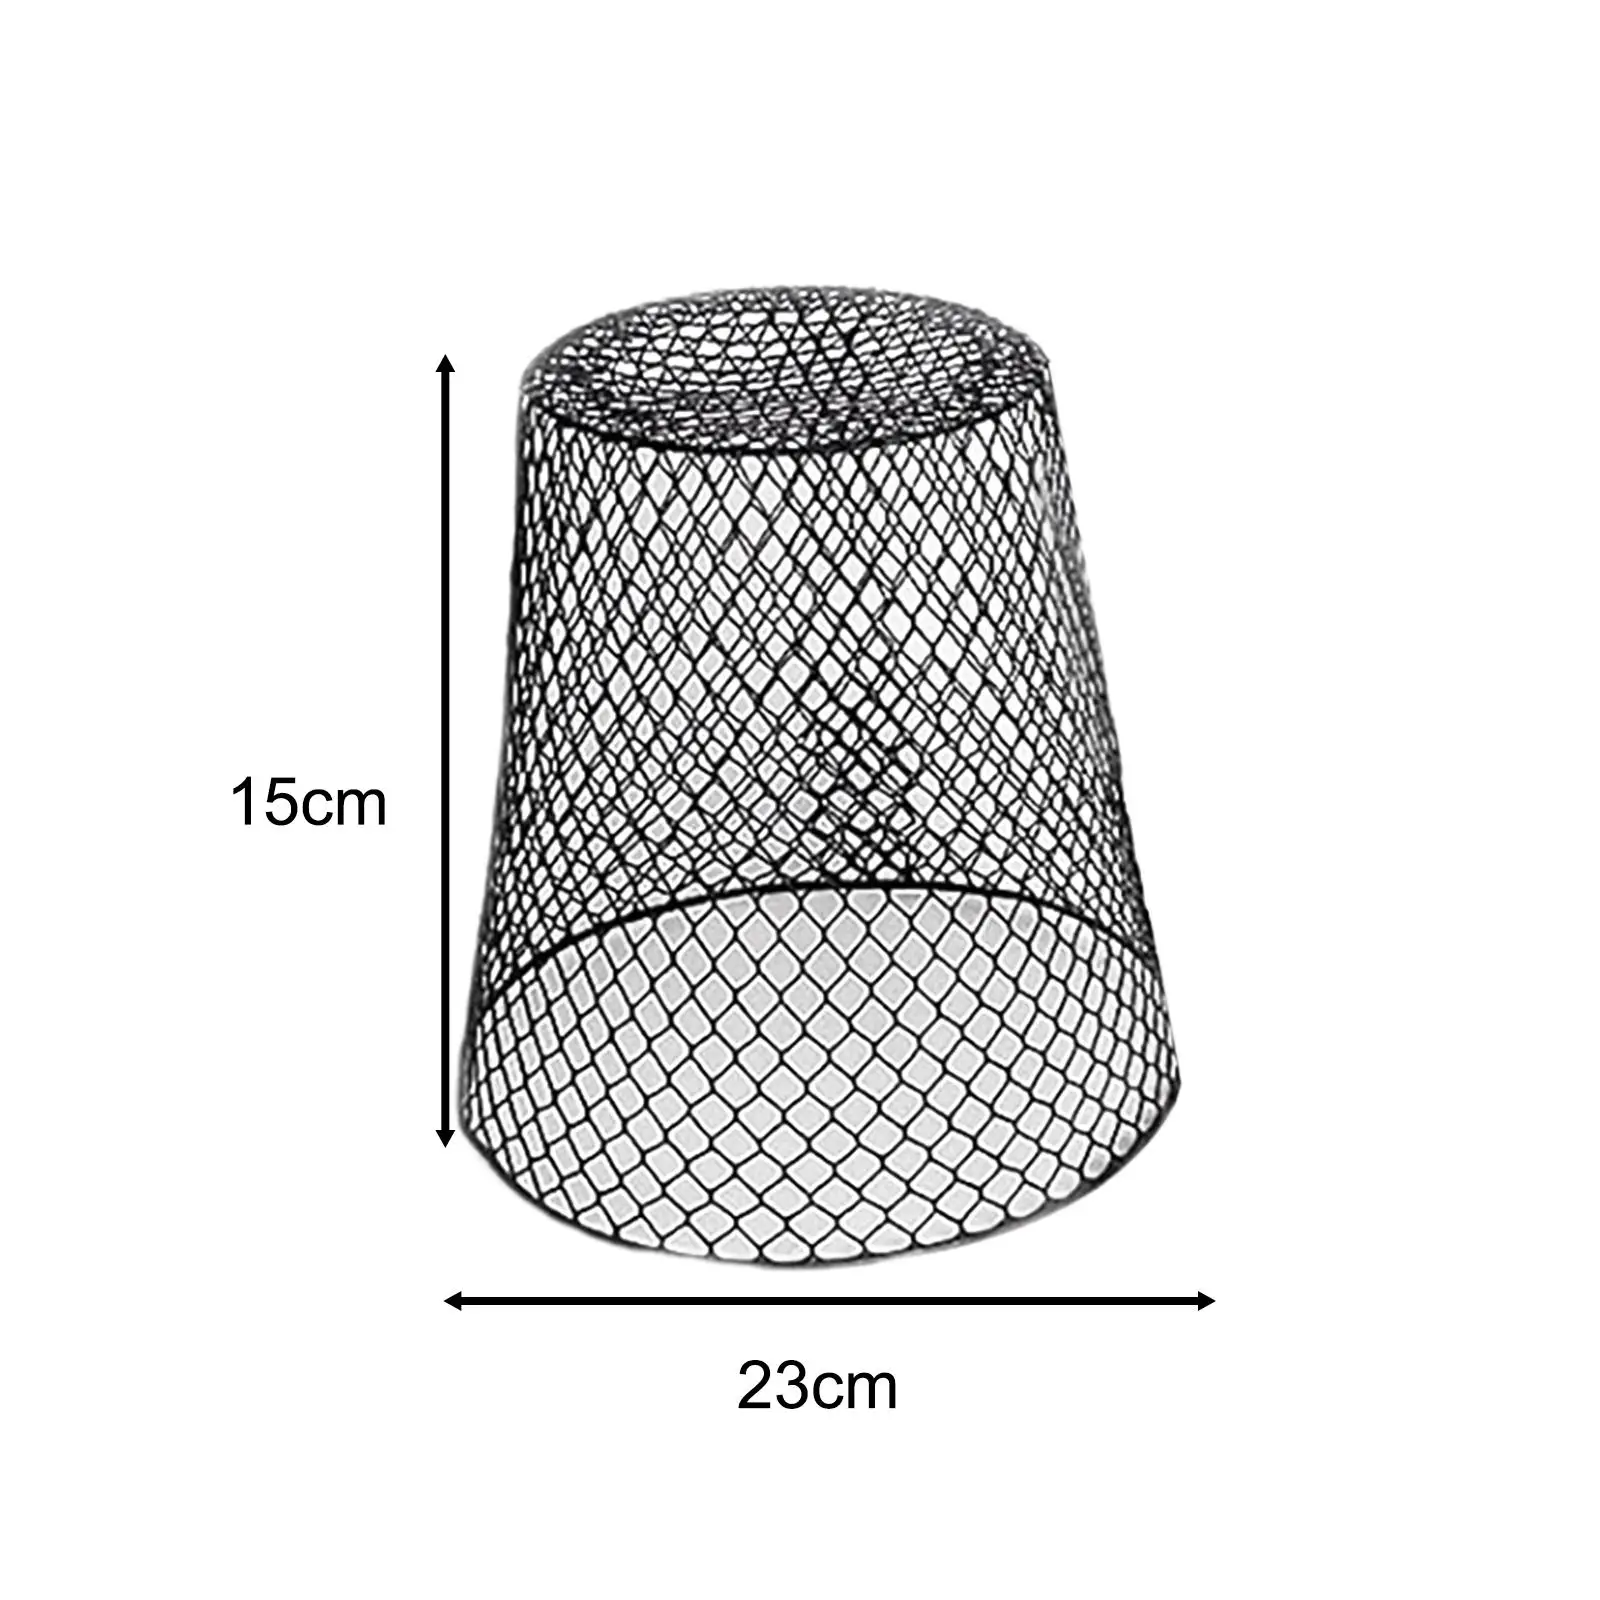 Garden Wire Cloche Easy to Use Garden Protection Prevent Animals Plant Protector for Fruit Indoor Rabbit Outdoor Seedlings